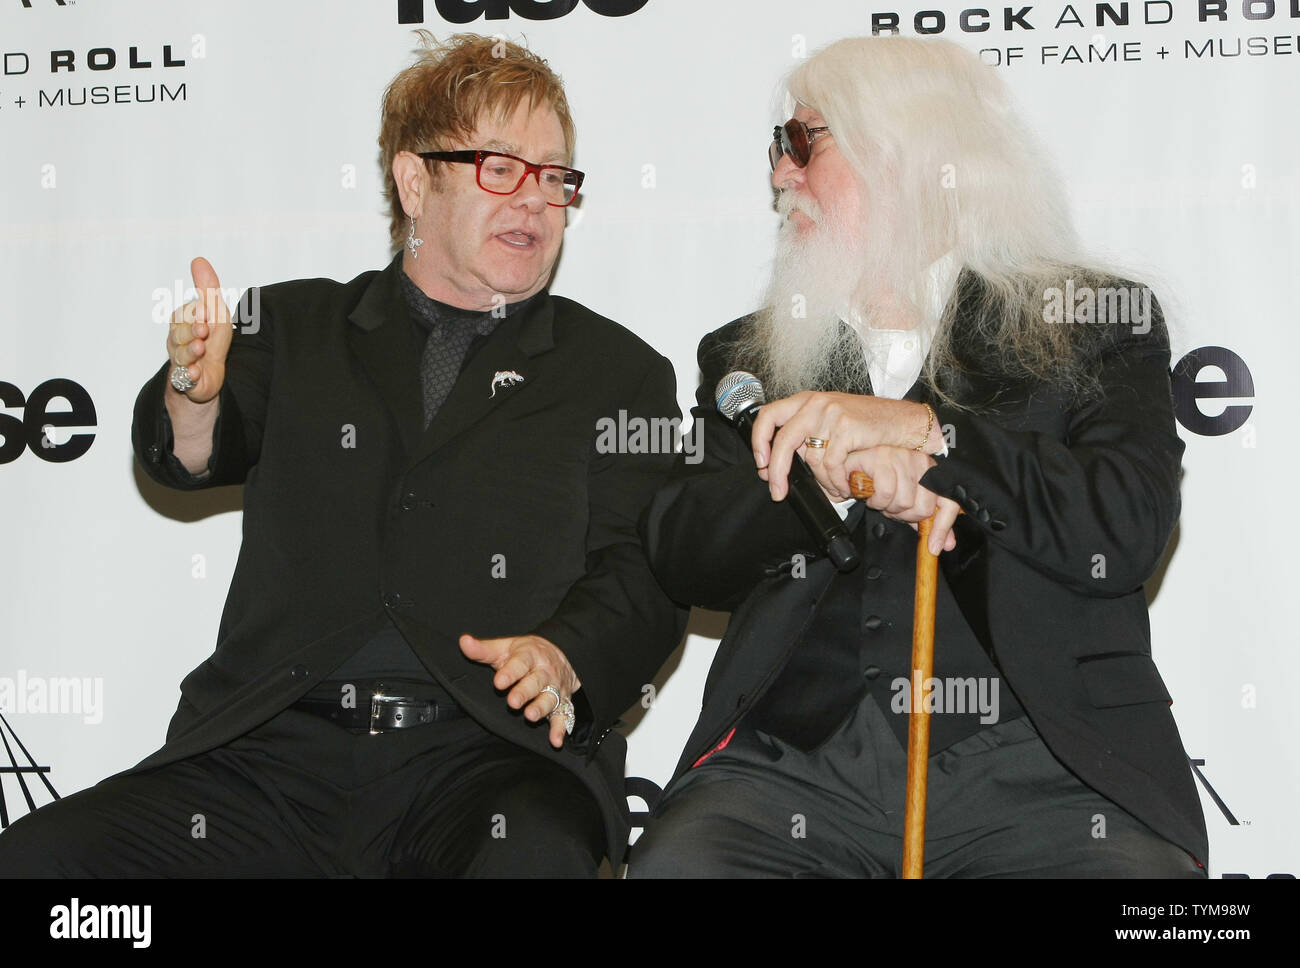 Elton John (L) talks with inductee Leon Russell at the Rock and Roll Hall of Fame induction ceremony held at the Waldorf-Astoria hotel in New York on March 14, 2011.      UPI Photo/Monika Graff... Stock Photo